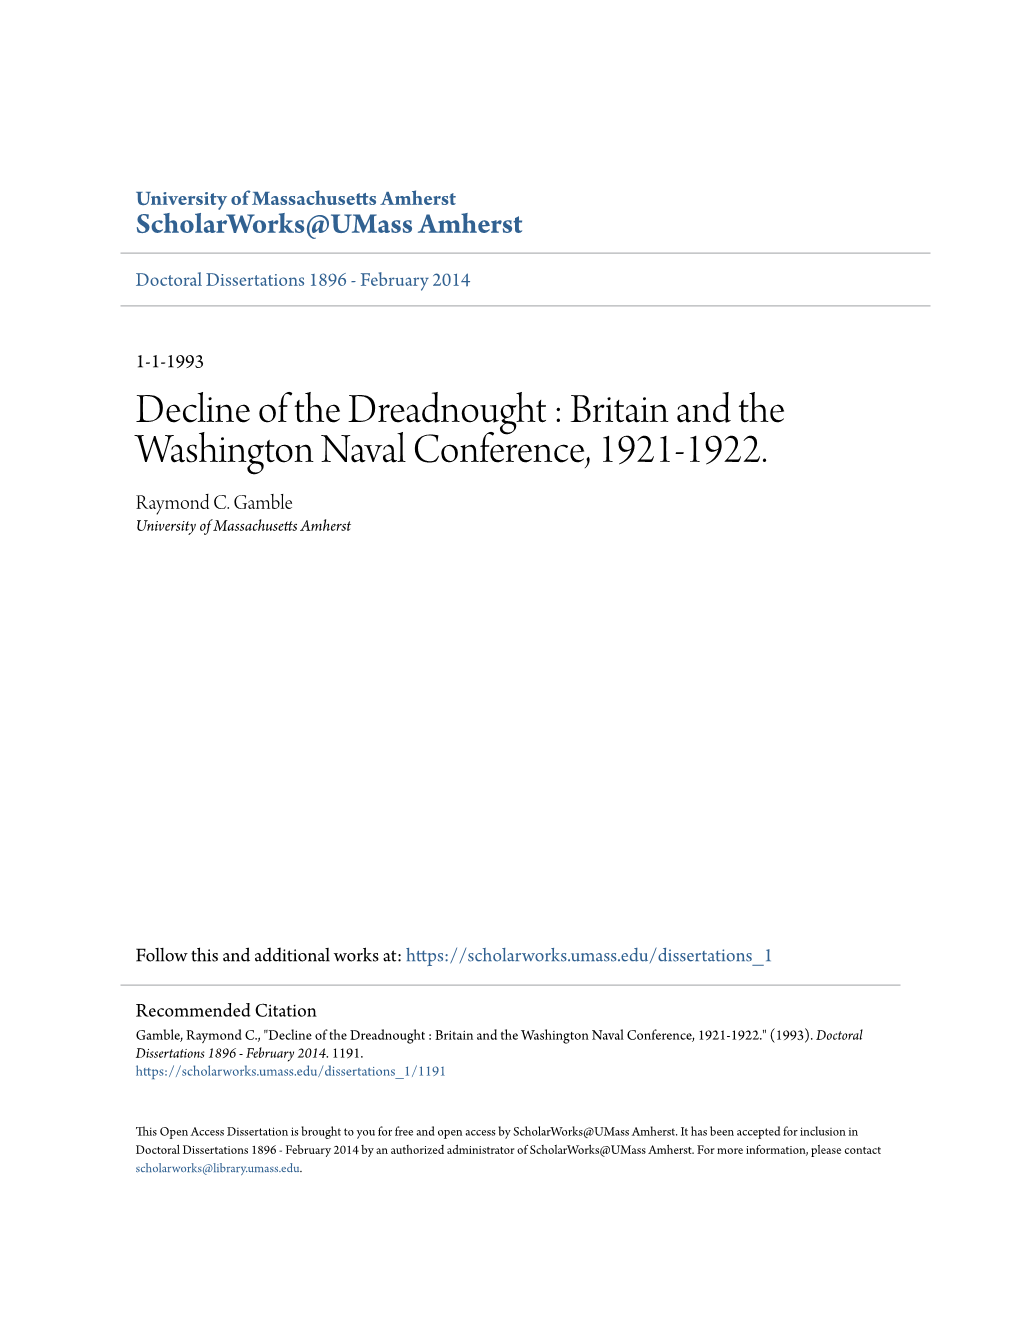 Decline of the Dreadnought : Britain and the Washington Naval Conference, 1921-1922